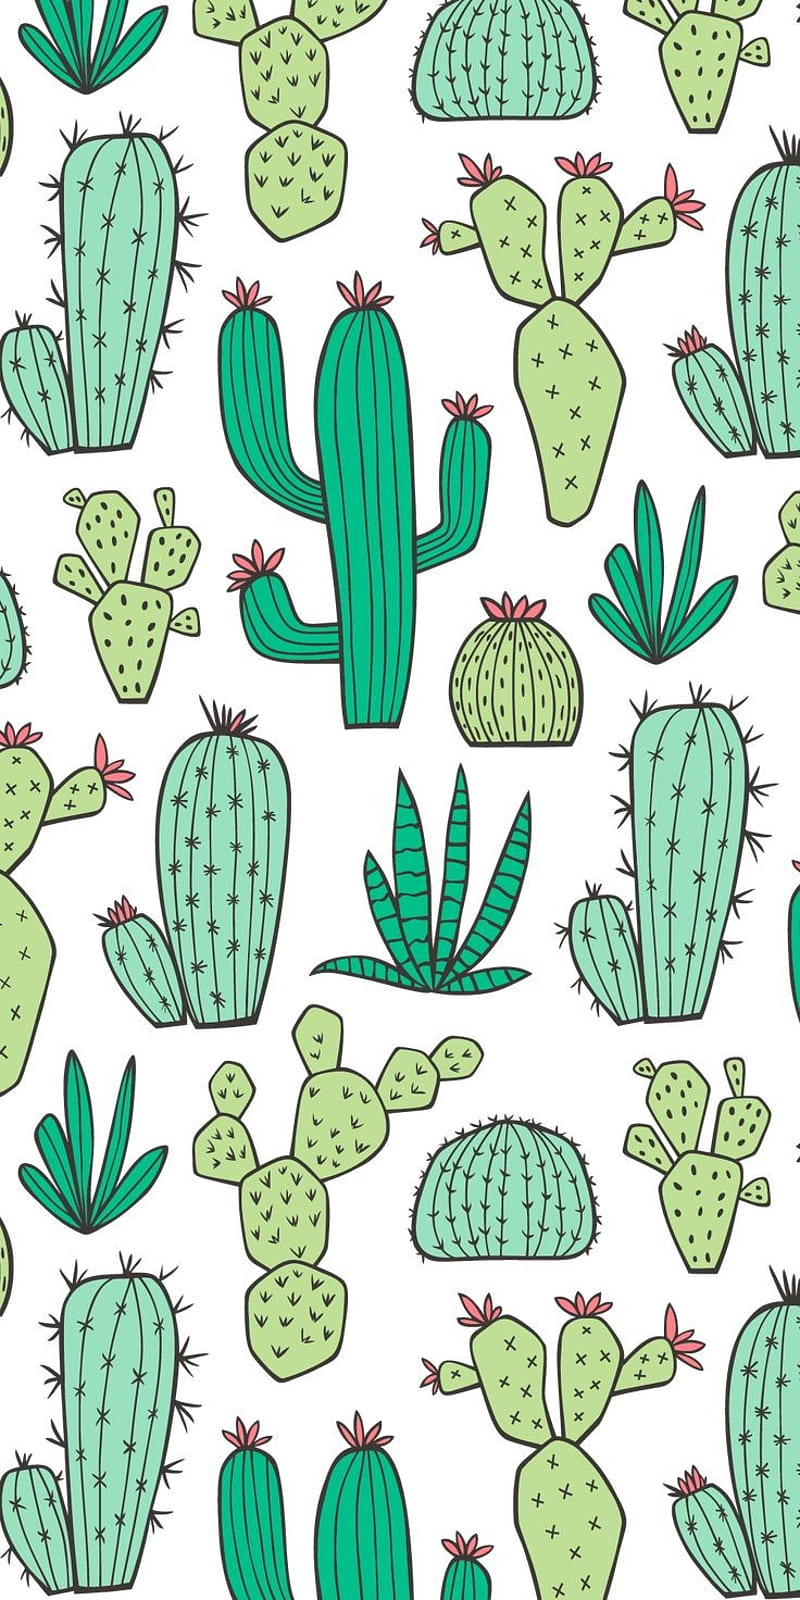 Green cacti on a white background - Pastel green